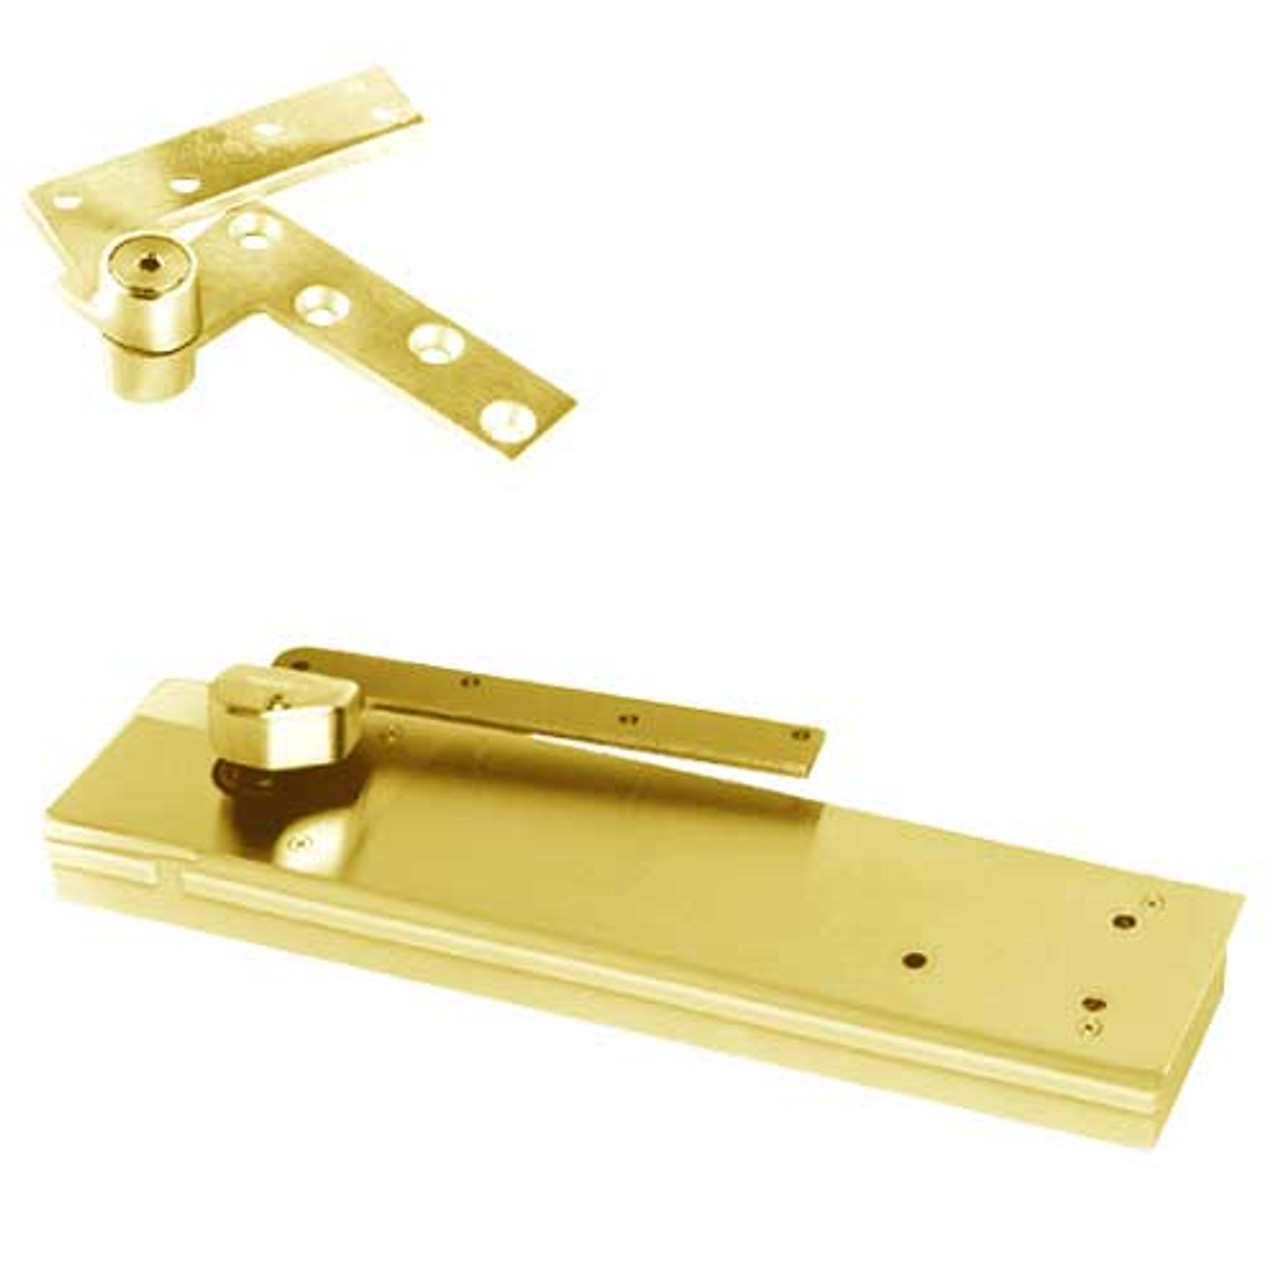 5103ABC105-LFP-LH-605 Rixson 51 Series 3/4" Offset Hung Shallow Depth Floor Closers in Bright Brass Finish